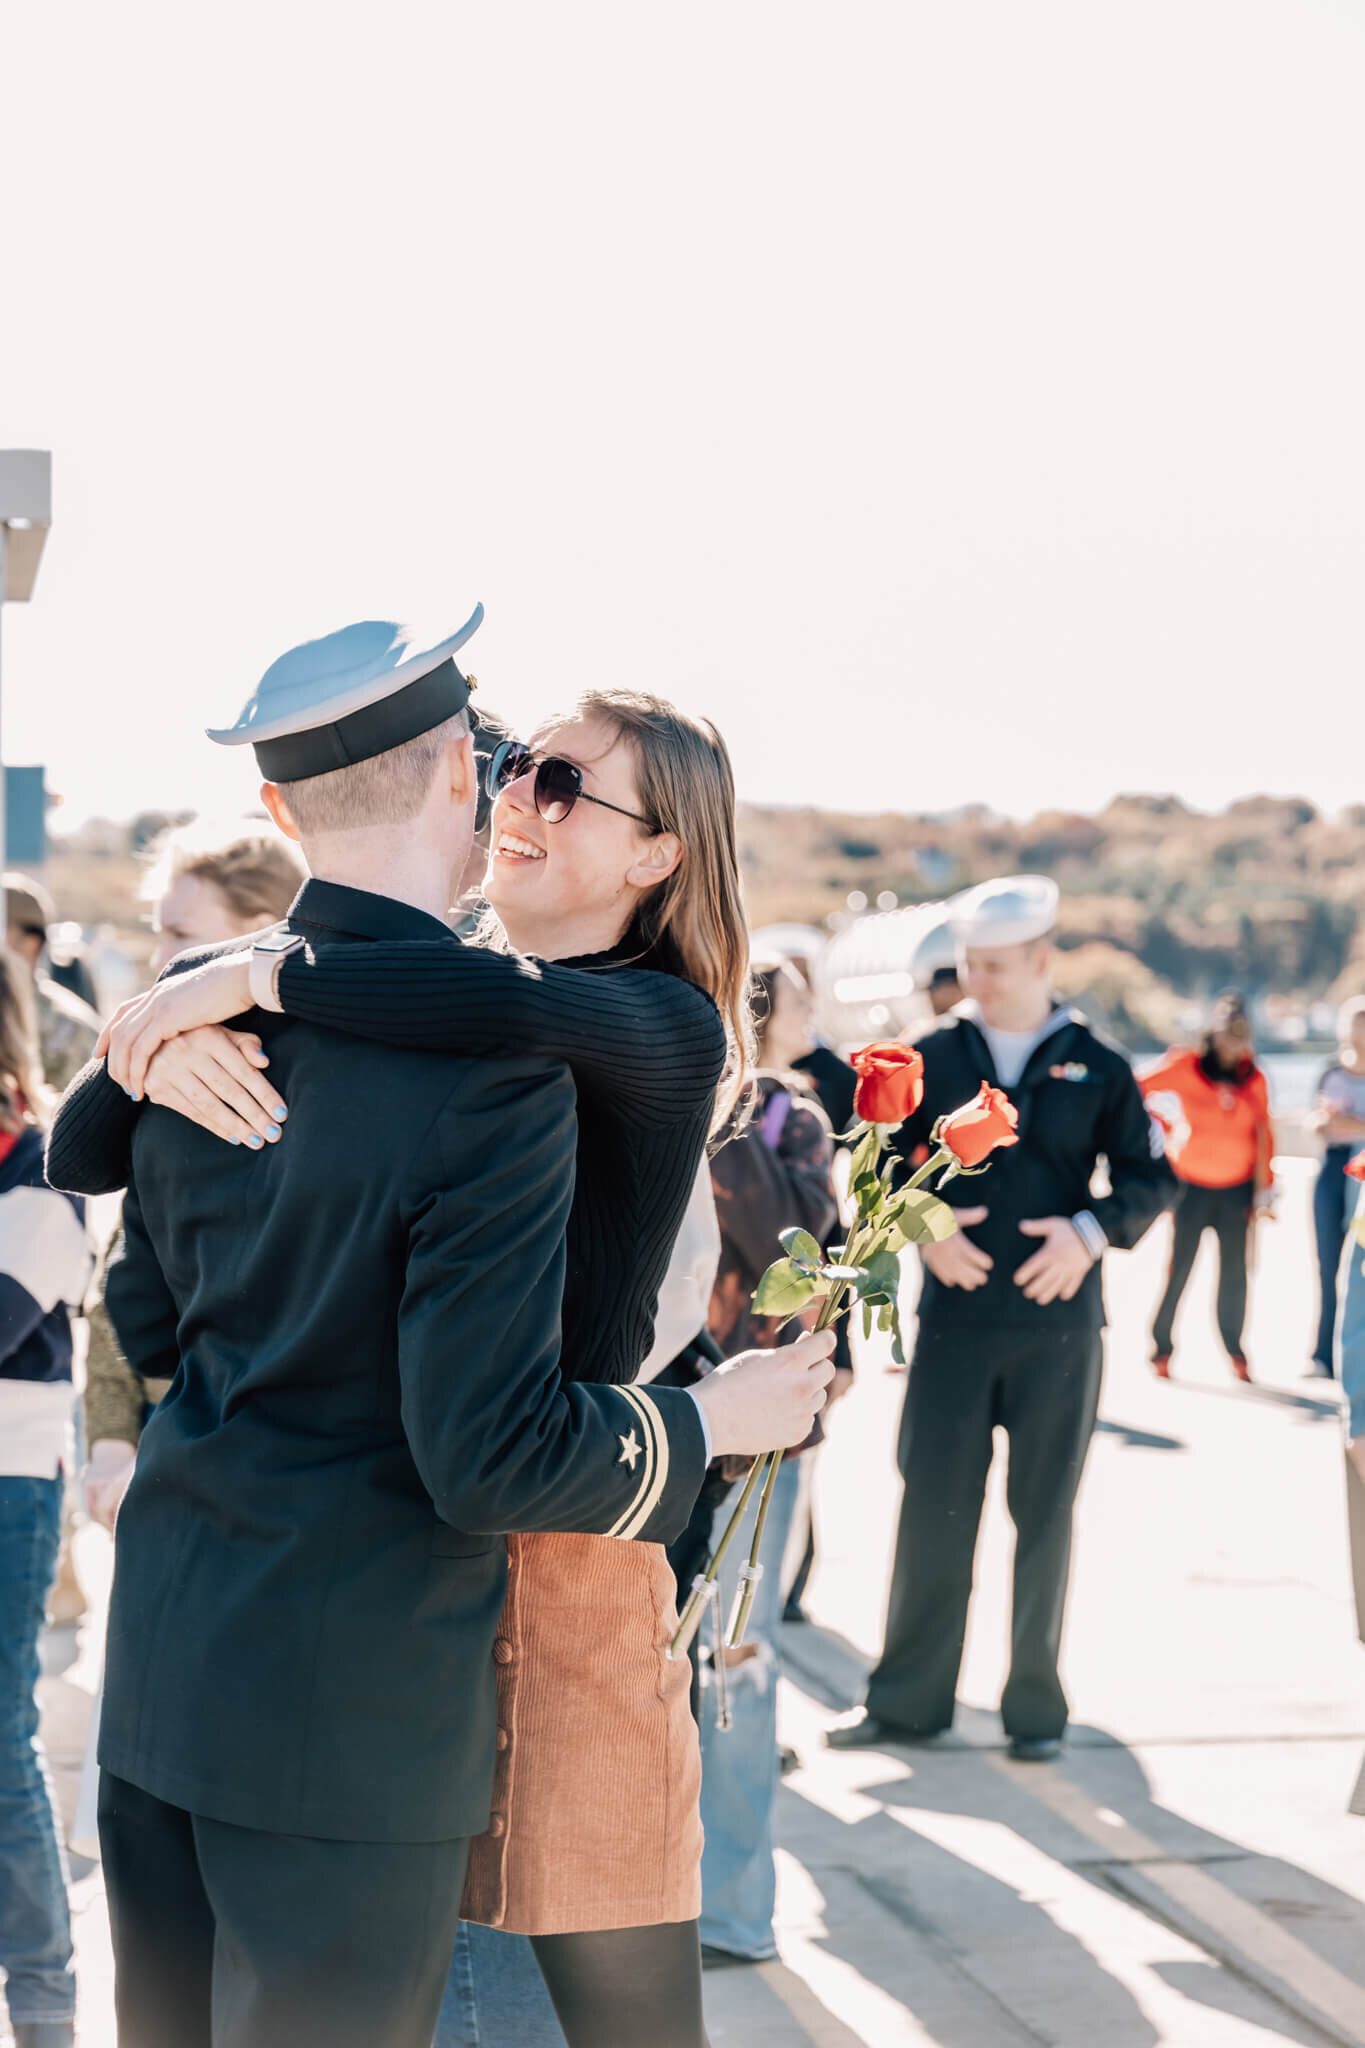 Naval officer embraces partner at USS North Dakota military homecoming at Naval Submarine Base New London in Groton, CT.